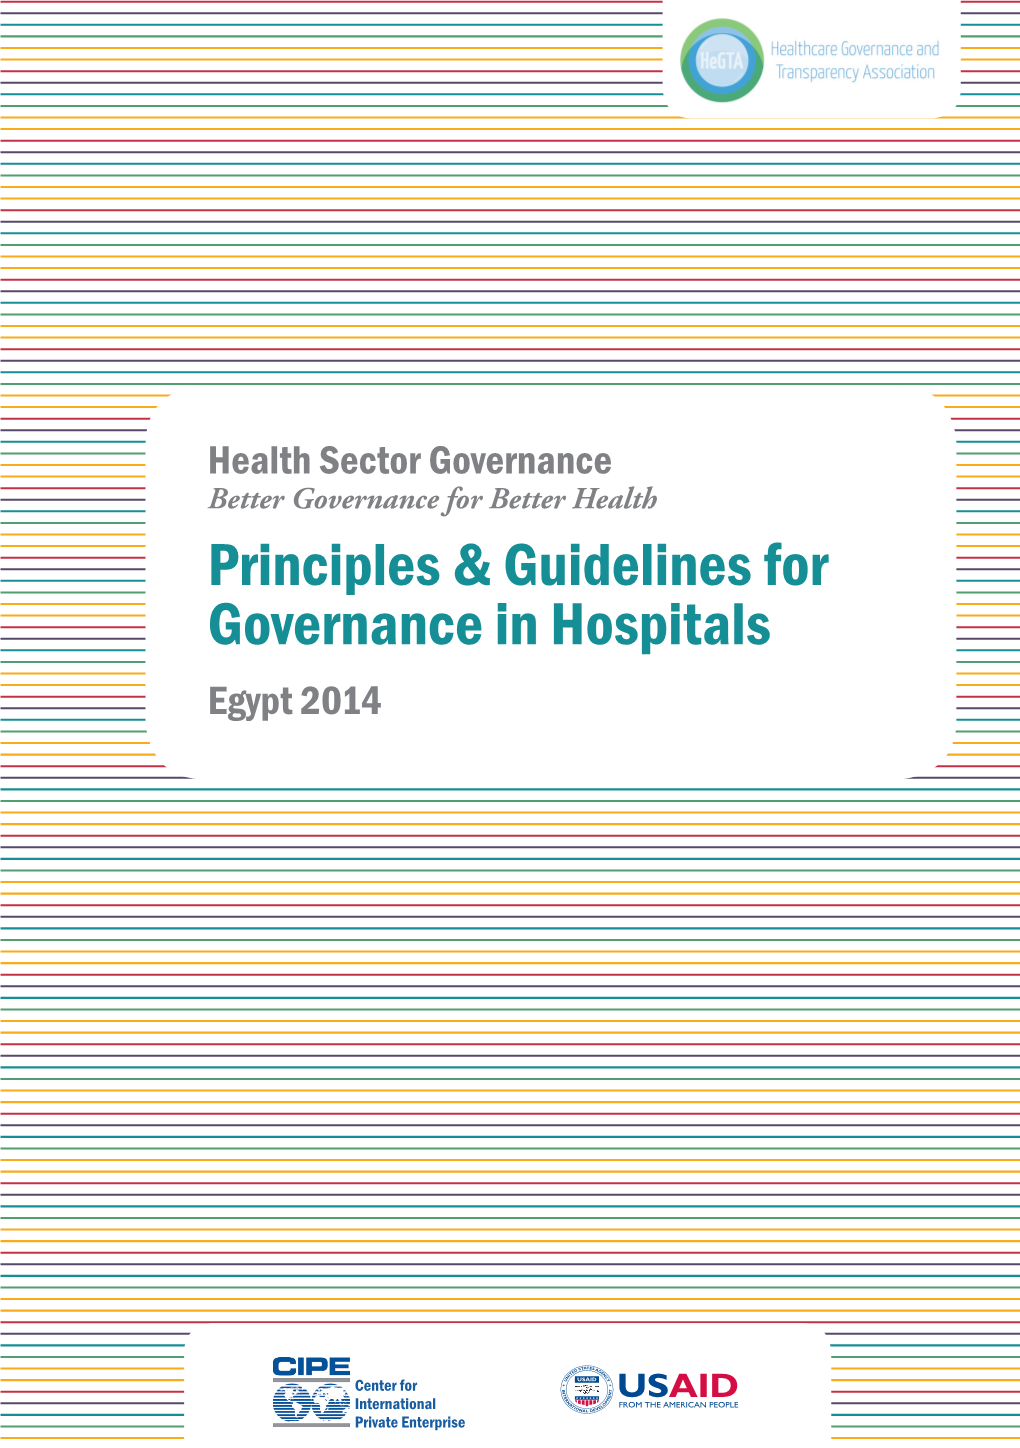 Principles & Guidelines for Governance in Hospitals